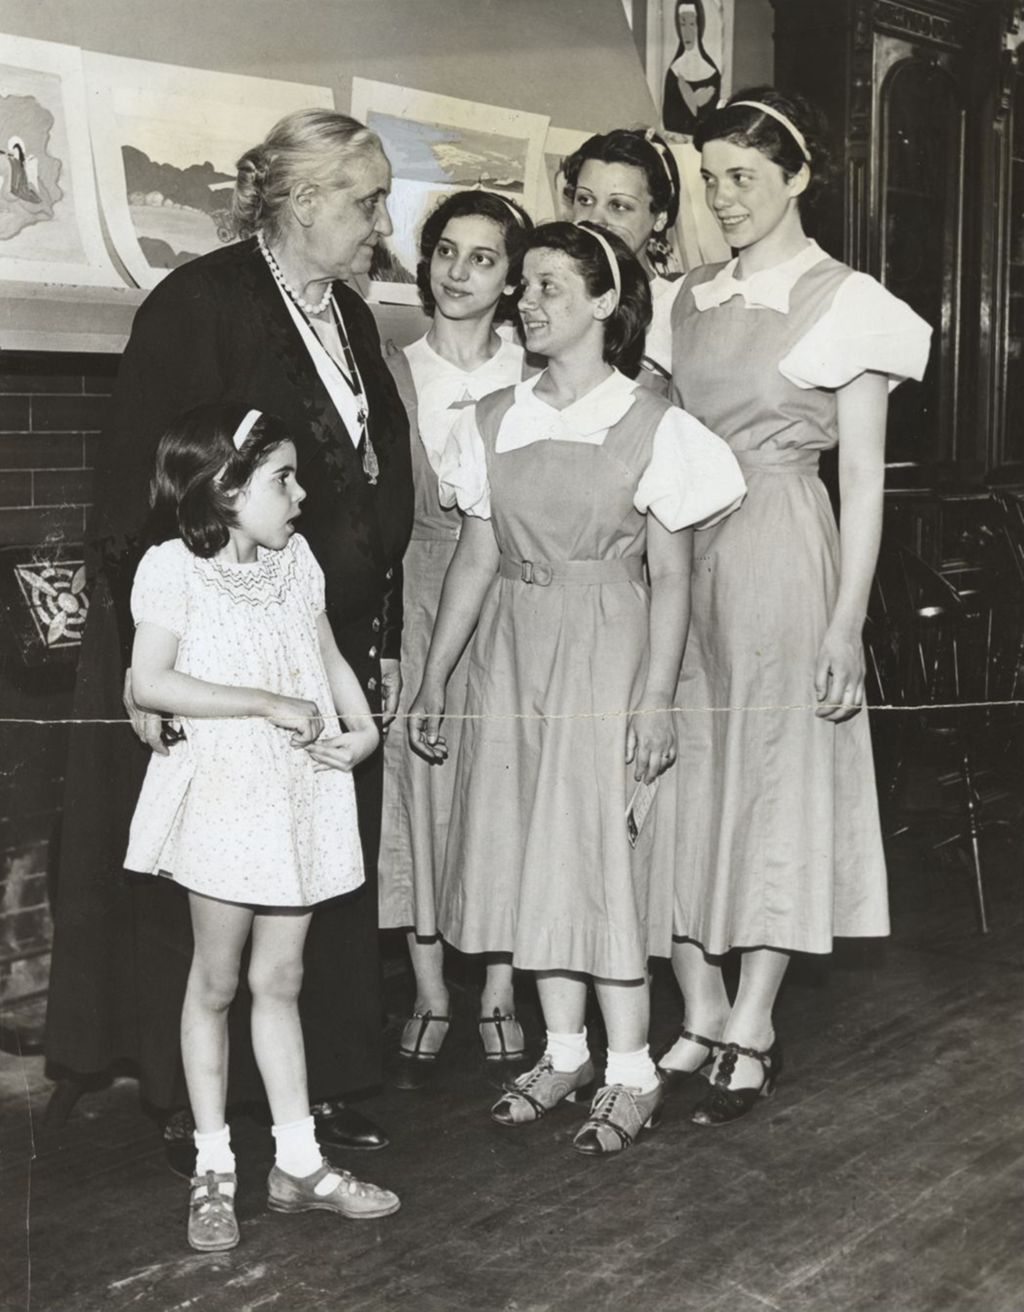 Miniature of Jane Addams with Hull-House Children